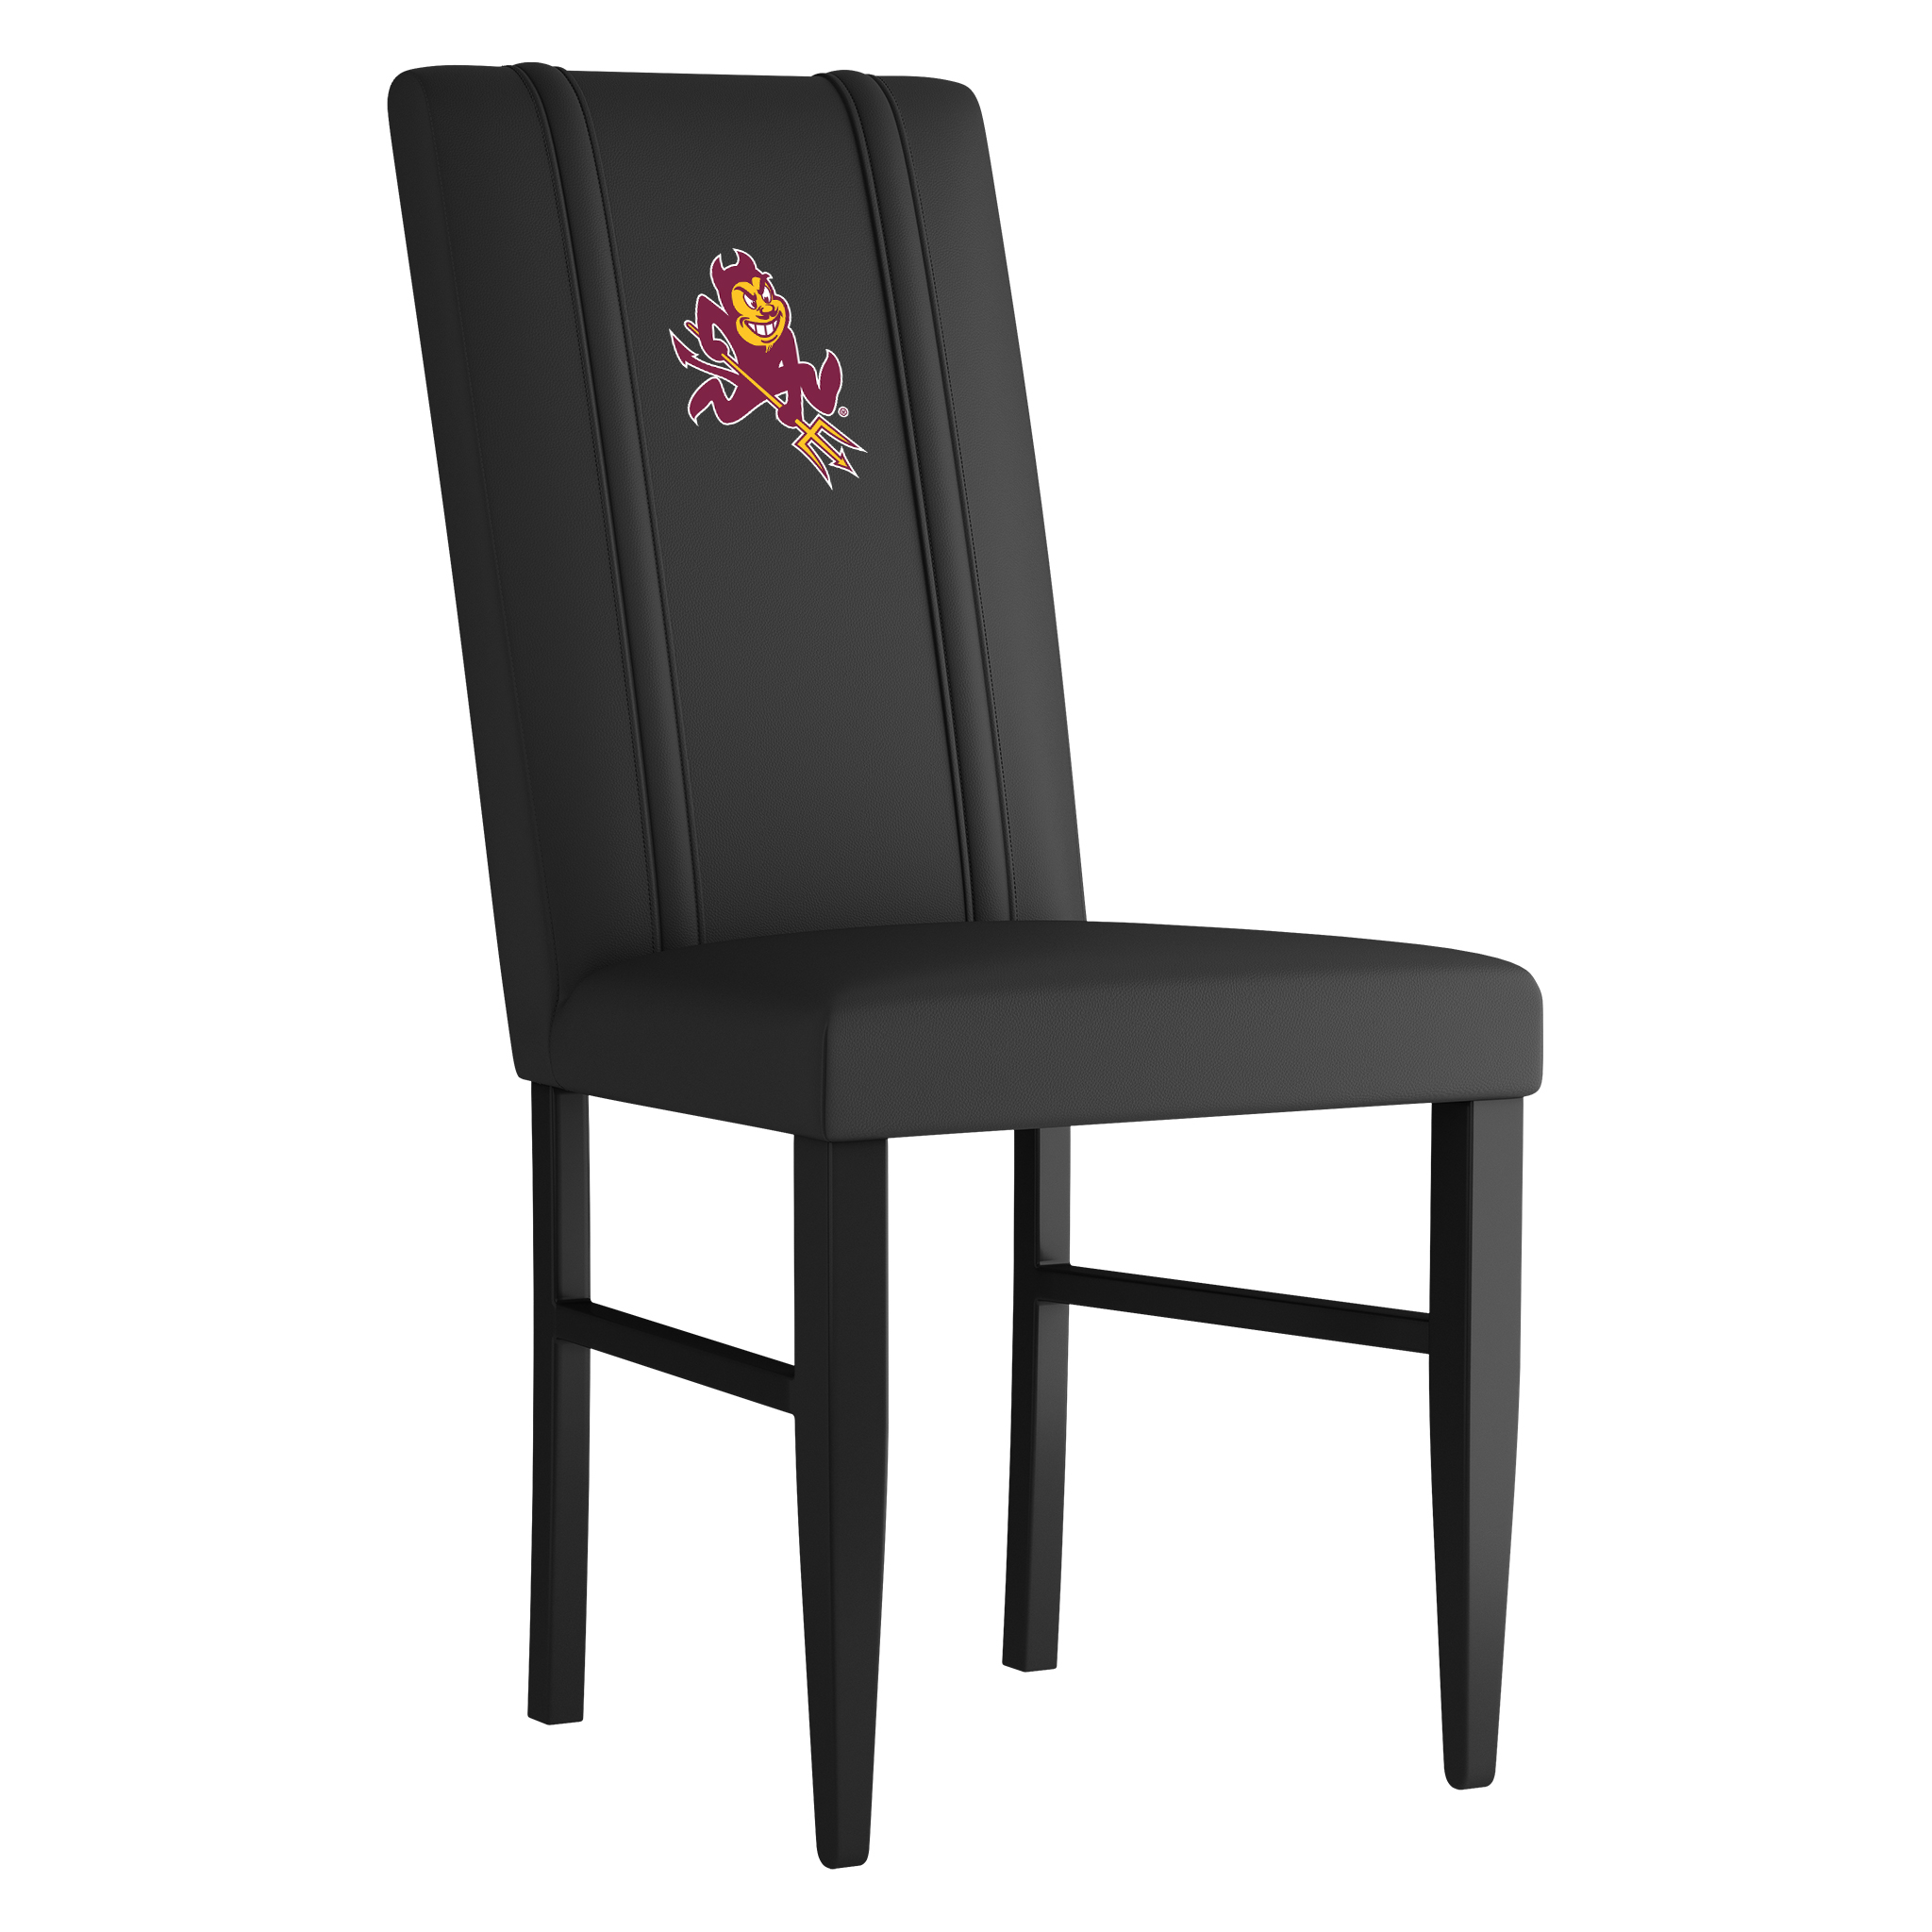 Arizona State Sundevils Side Chair 2000 With Arizona State Sparky Logo